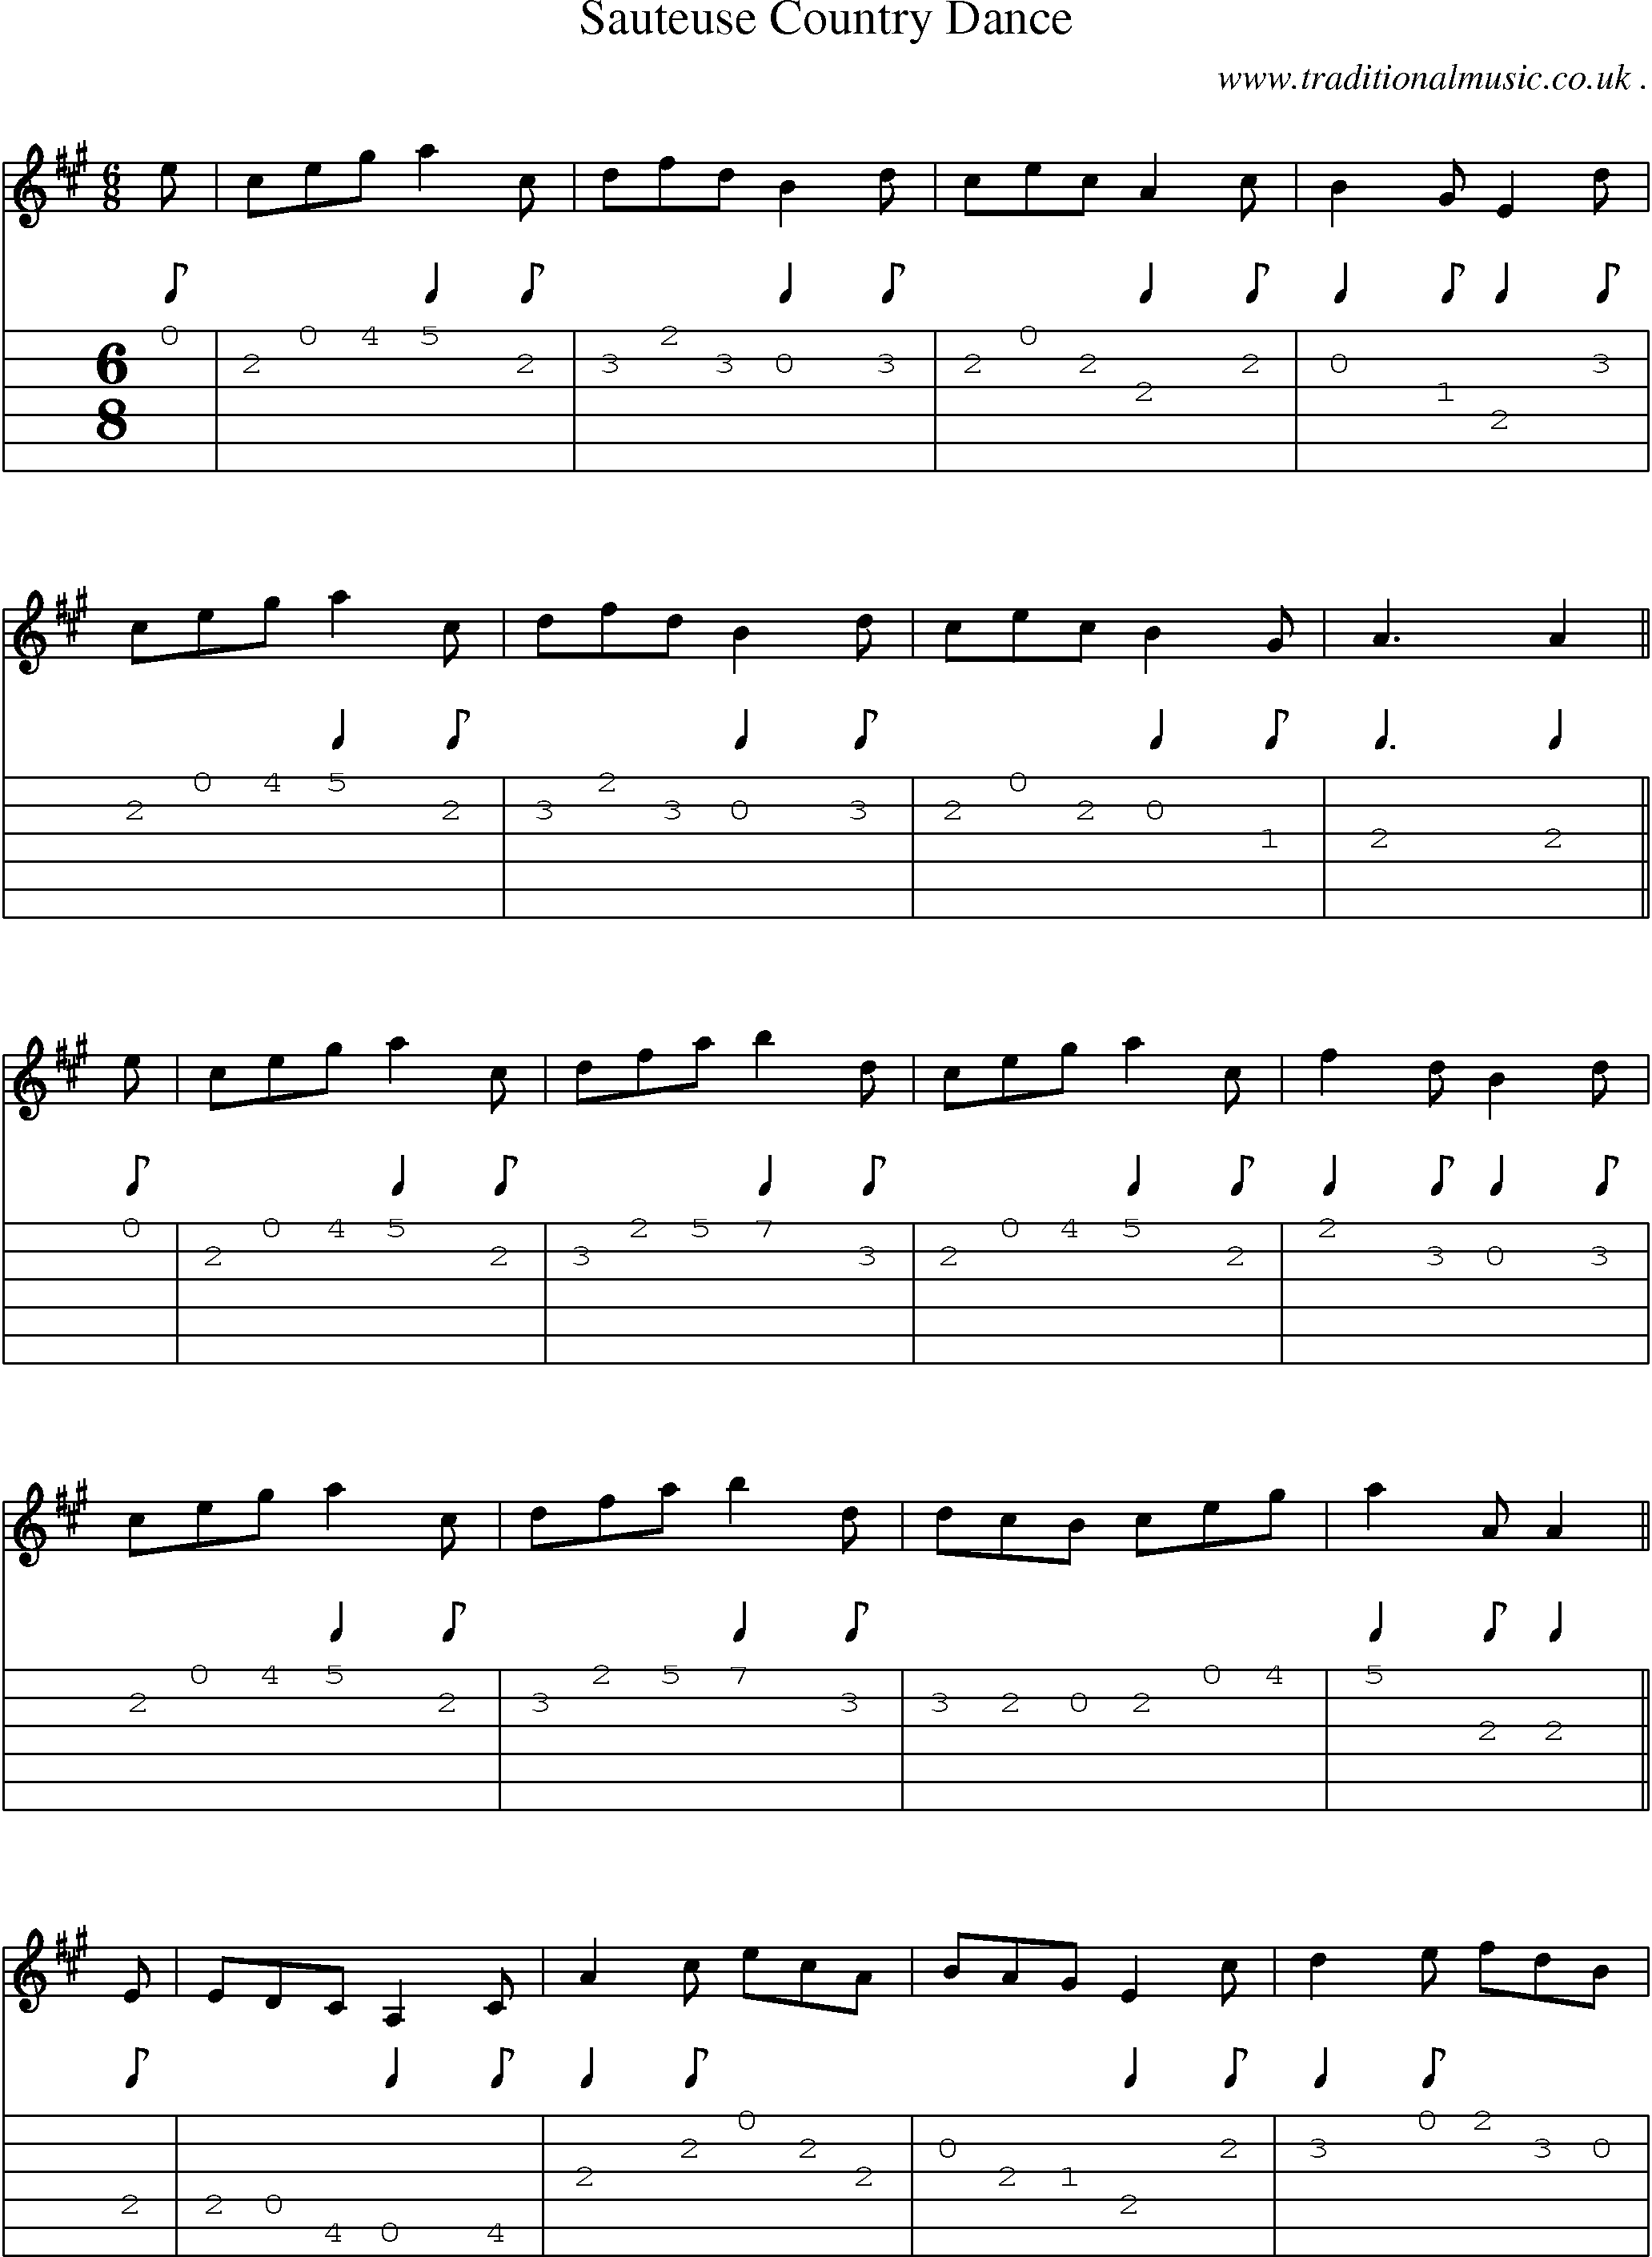 Sheet-Music and Guitar Tabs for Sauteuse Country Dance